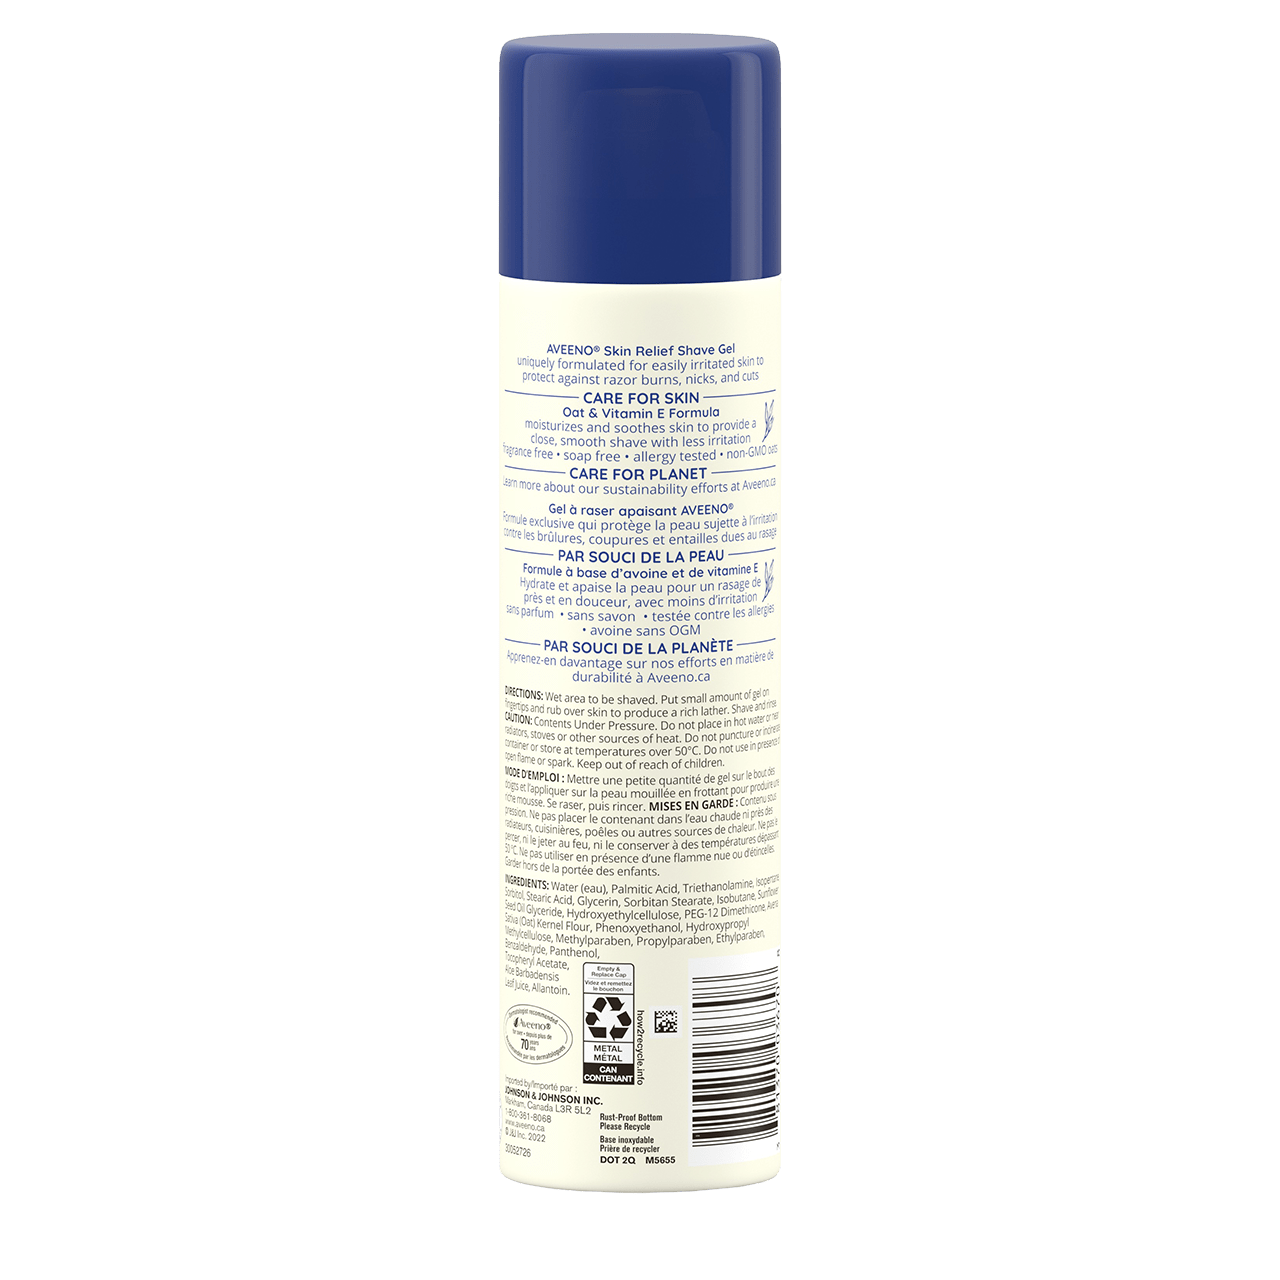 AVEENO® Skin Relief Shave Gel, 198g spray can, back label